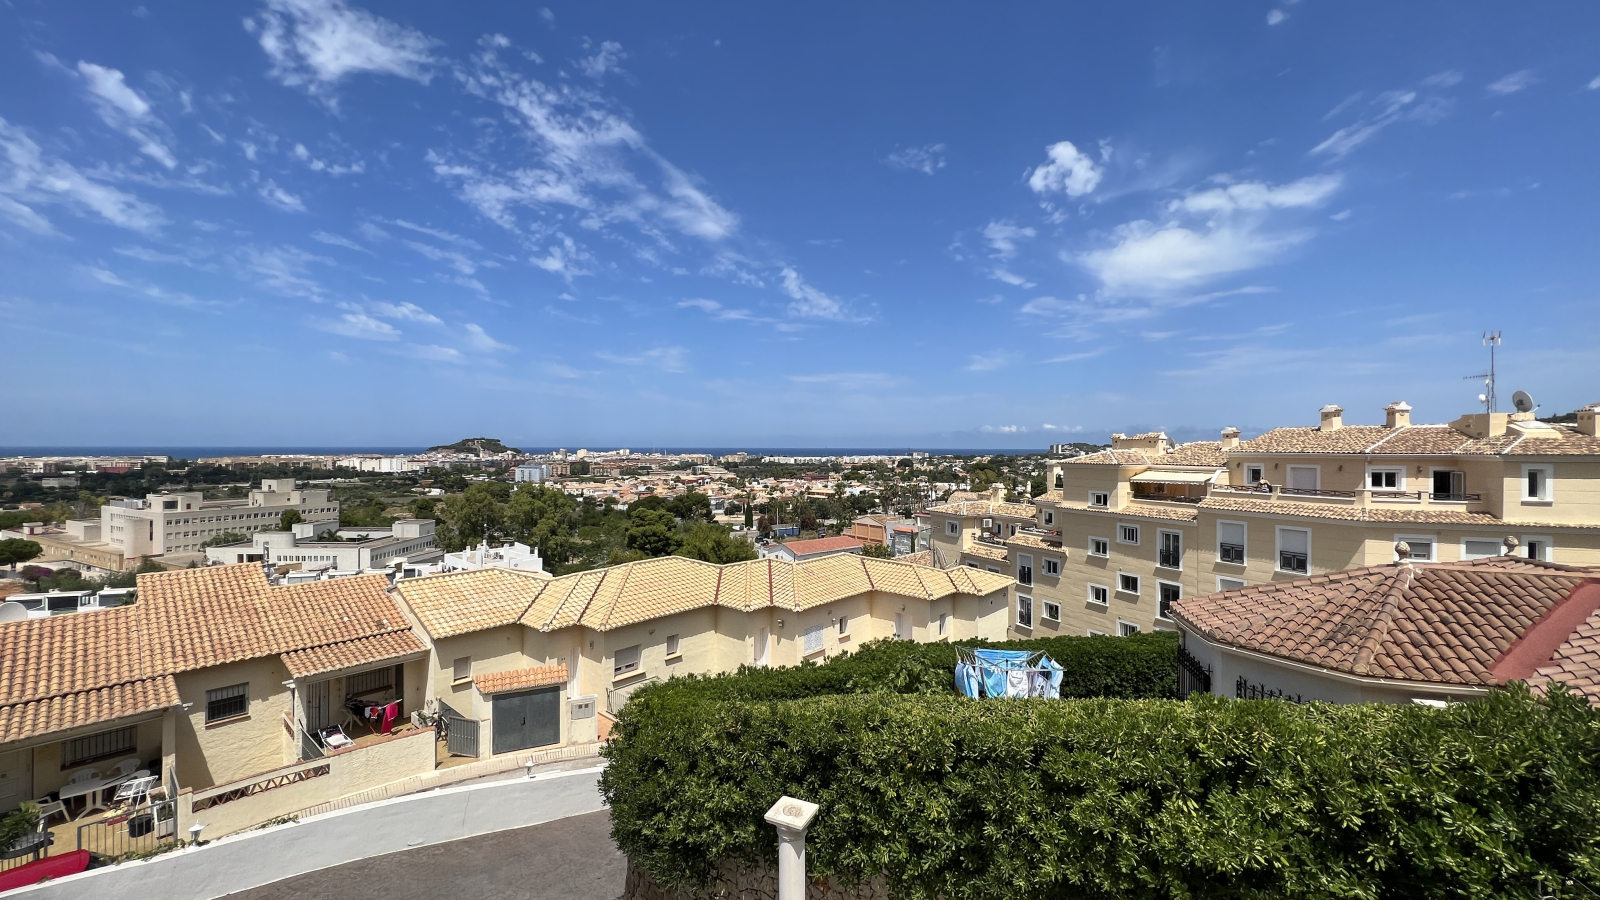 Close to the city, new building with 2 bedrooms and community pool in wonderful panoramic location in Denia.